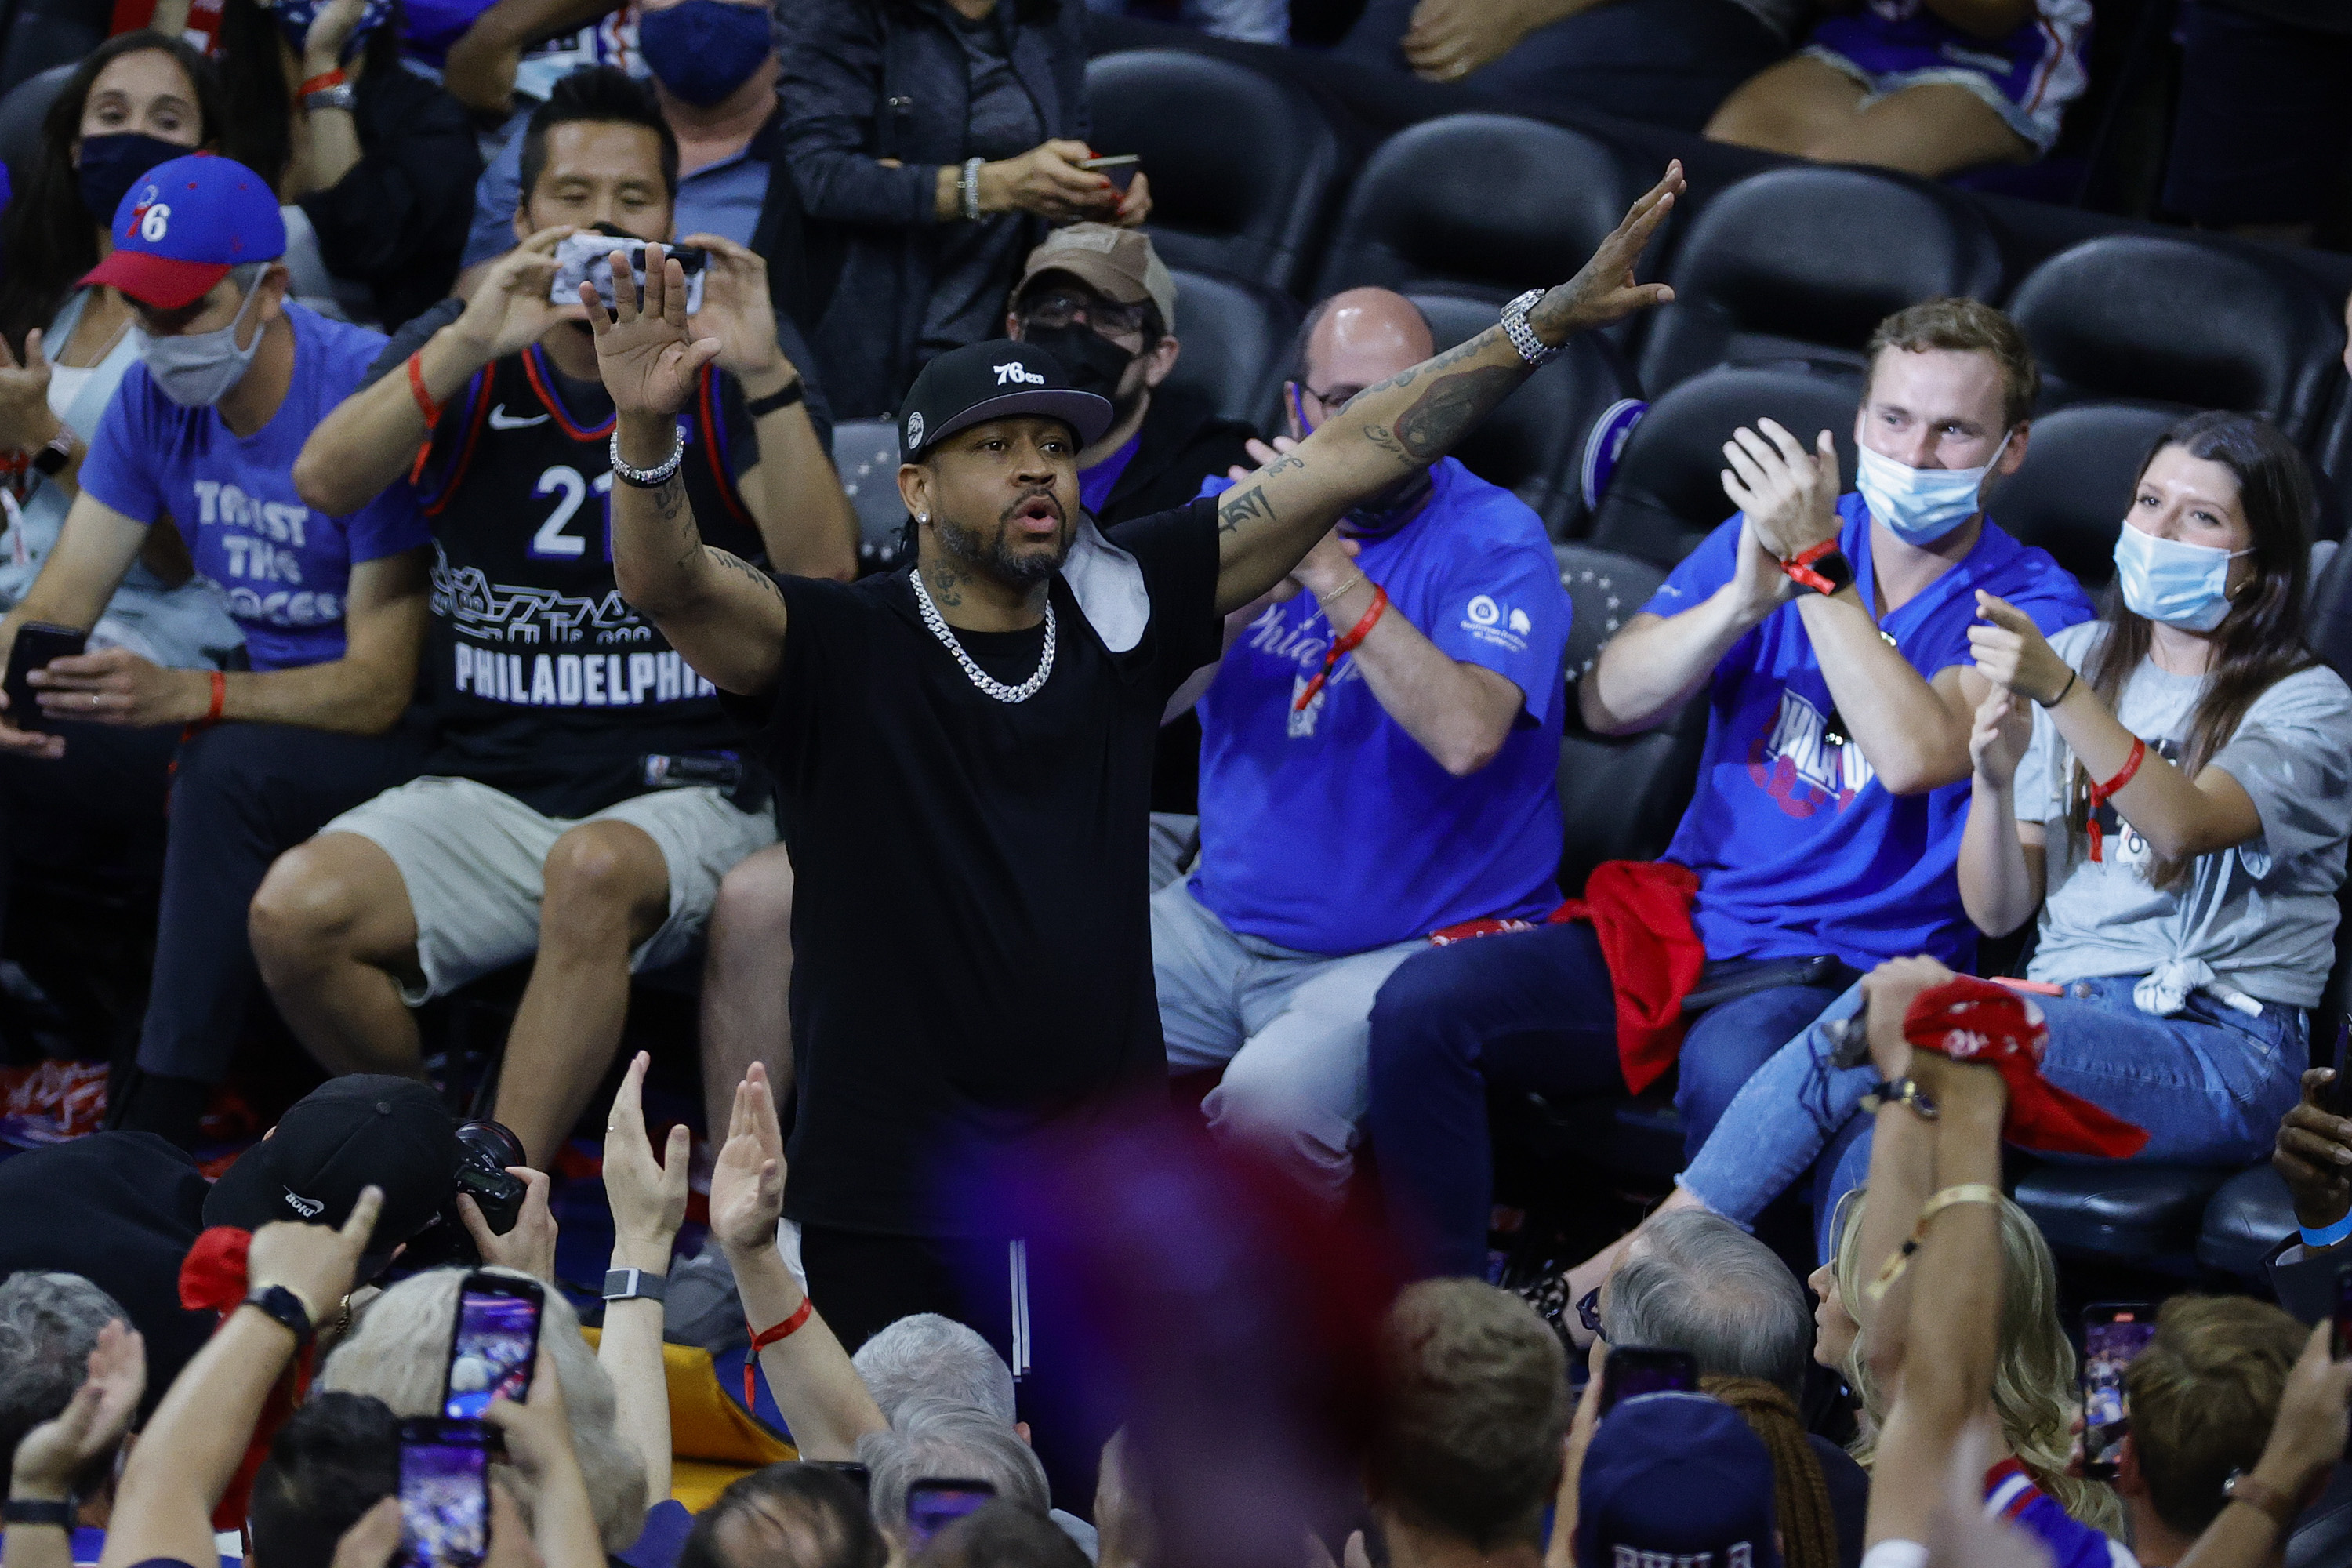 Philadelphia 76ers great Allen Iverson waves to the crowd during a playoff game